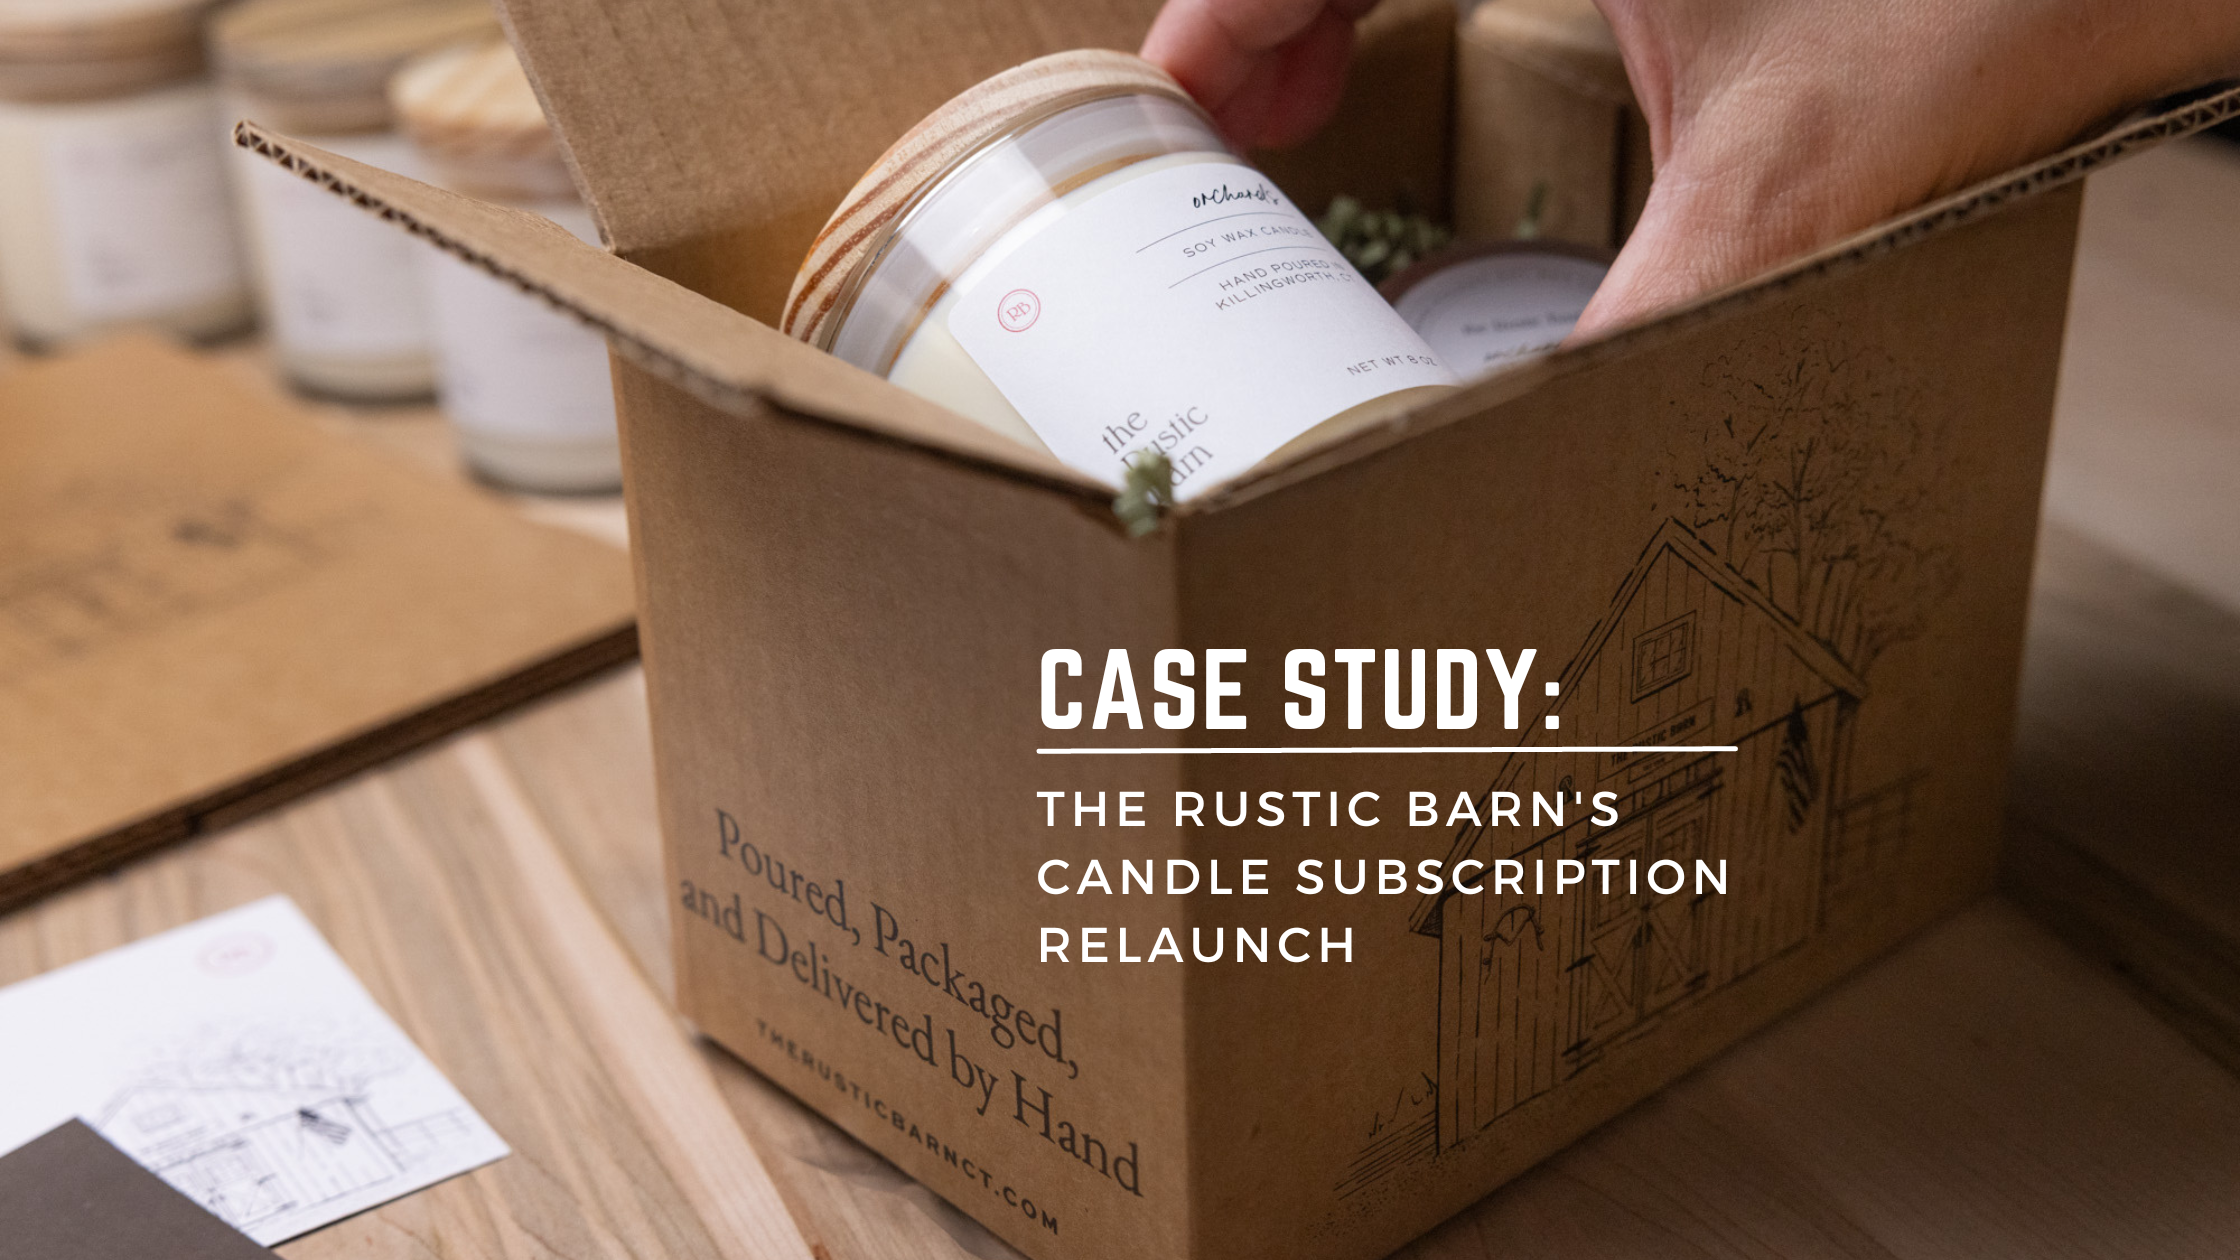 The Rustic Barn Candle Subscription case study